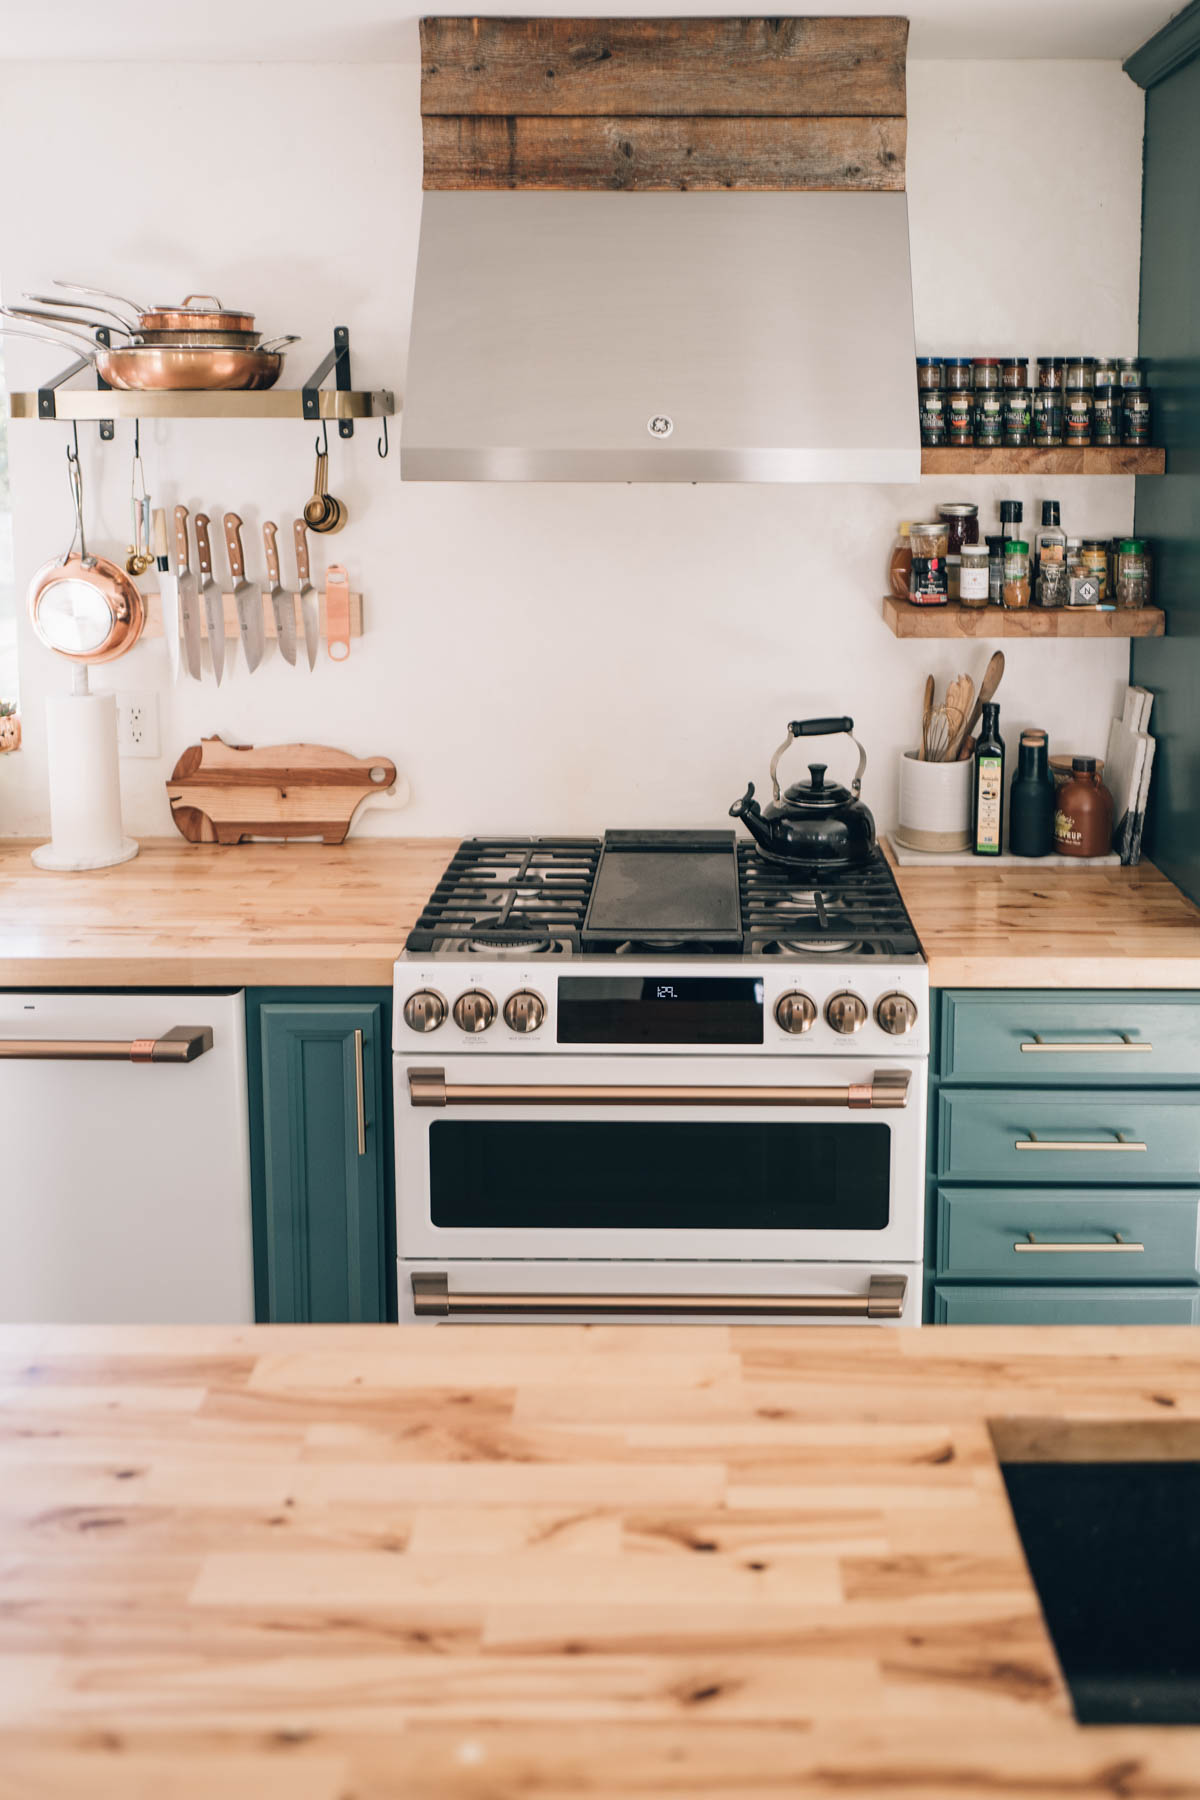 No more boring appliances, customize your kitchen with @cafeappliances Pictured is the Dual-Fuel Double Oven with Convection Range in Matte White with Brushed Bronze Hardware in Jess Kirby's kitchen